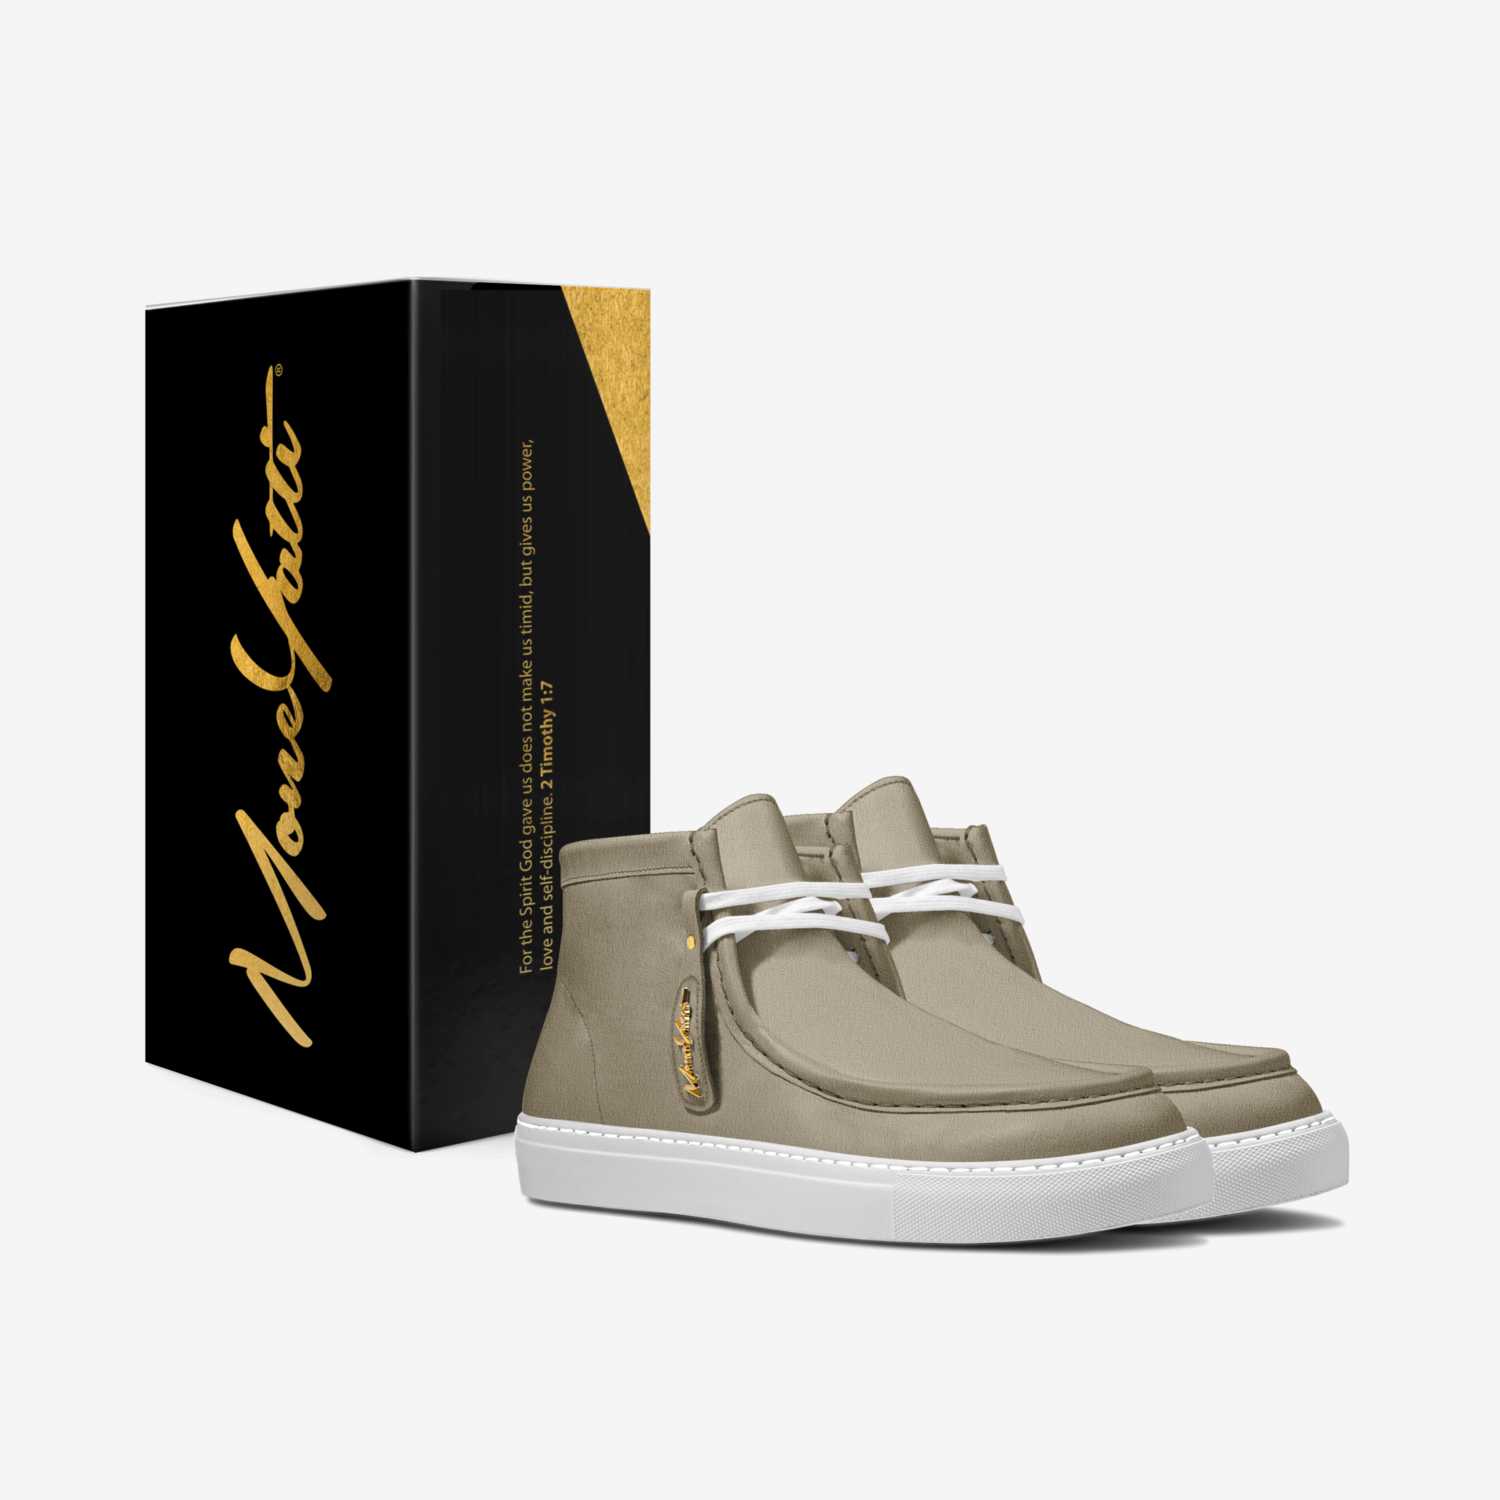 LUX SUEDE 003 custom made in Italy shoes by Moneyatti Brand | Box view